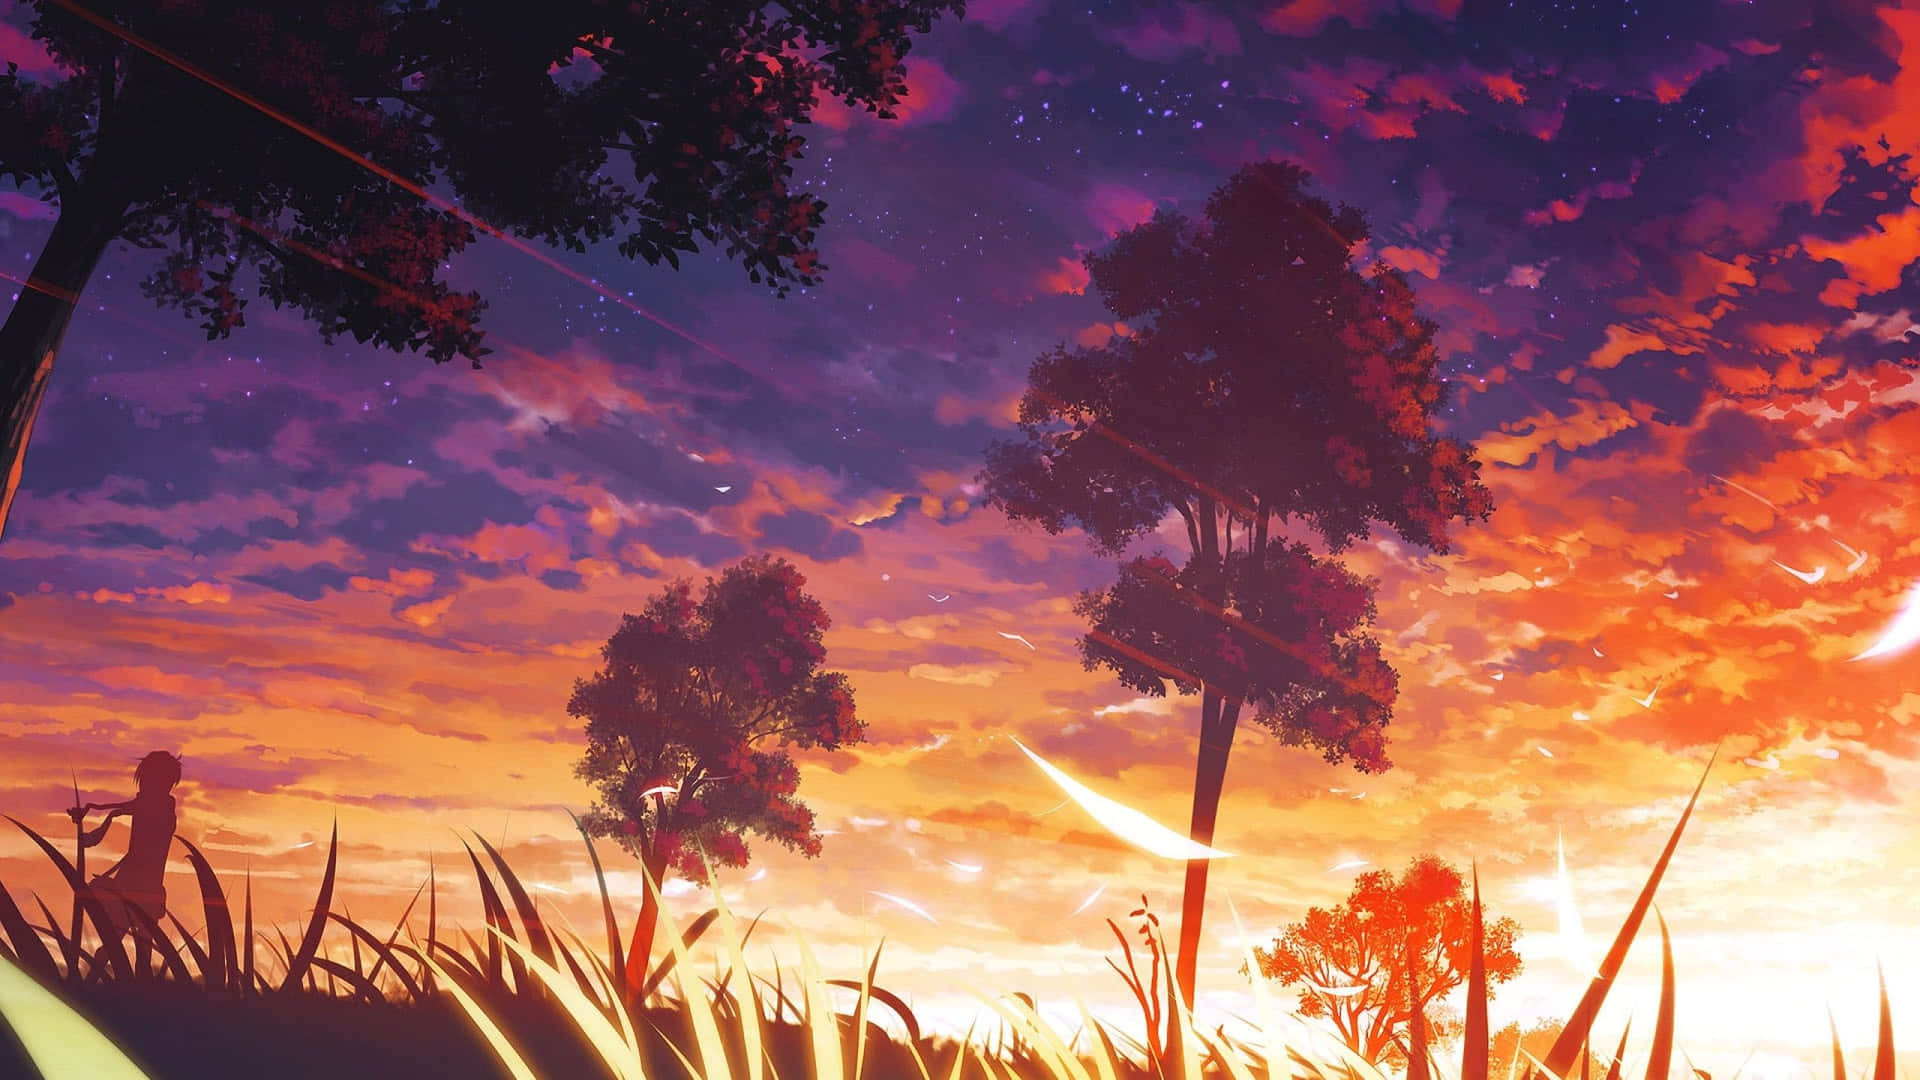 Mesmerizing Anime Sunset - The Perfect Blend of Serenity and Wonder